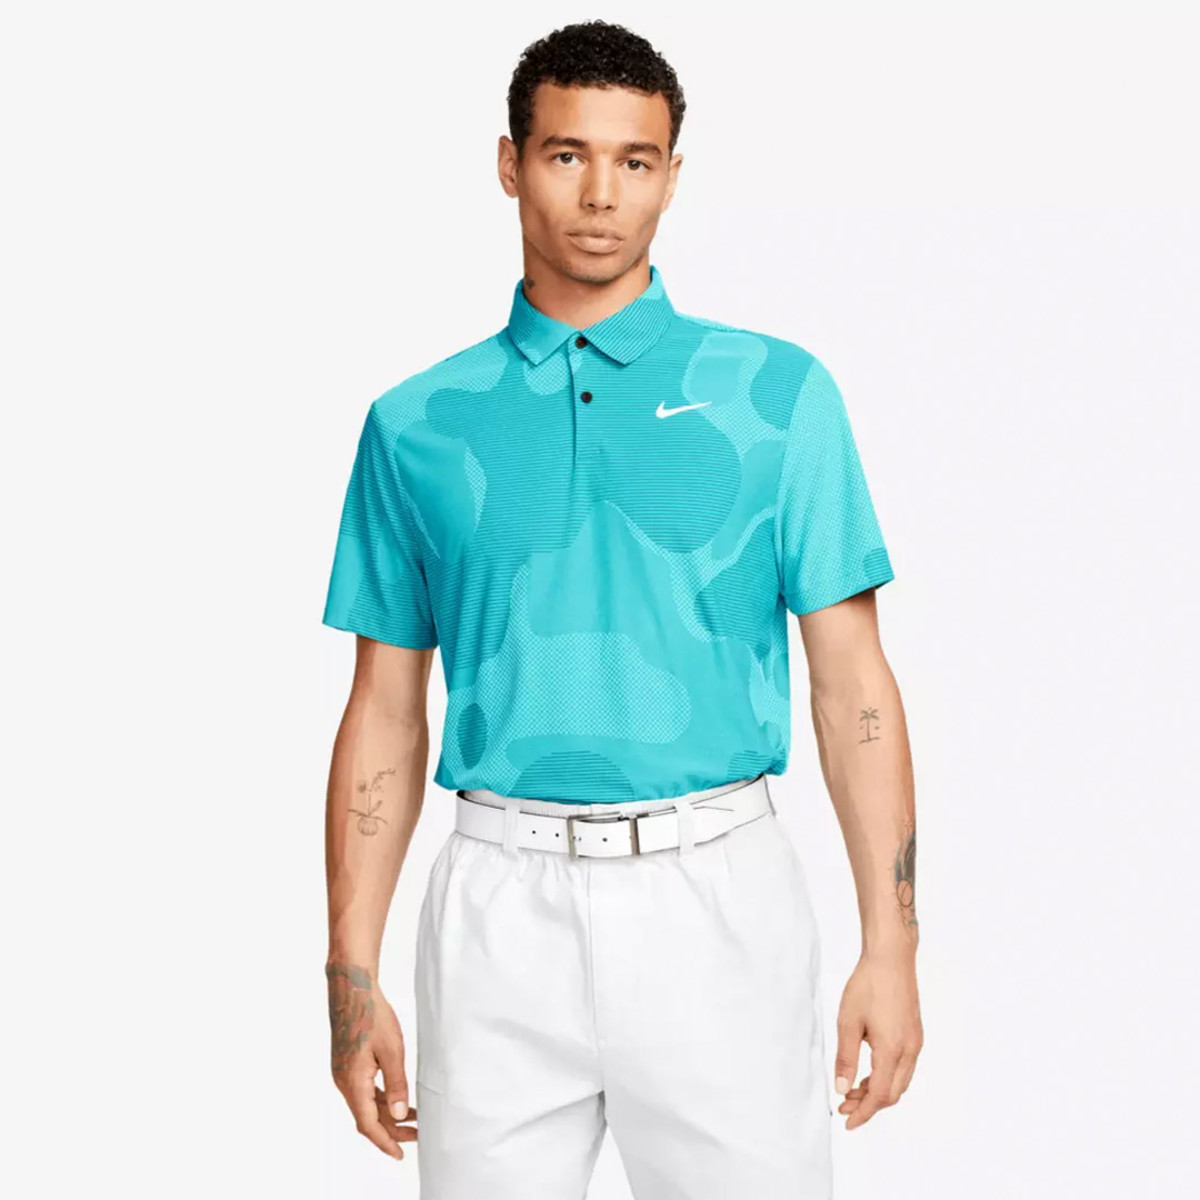 The Nike Dri-FIT ADV Tour Men's Camo Golf Polo is on sale right now at PGA Tour Superstore